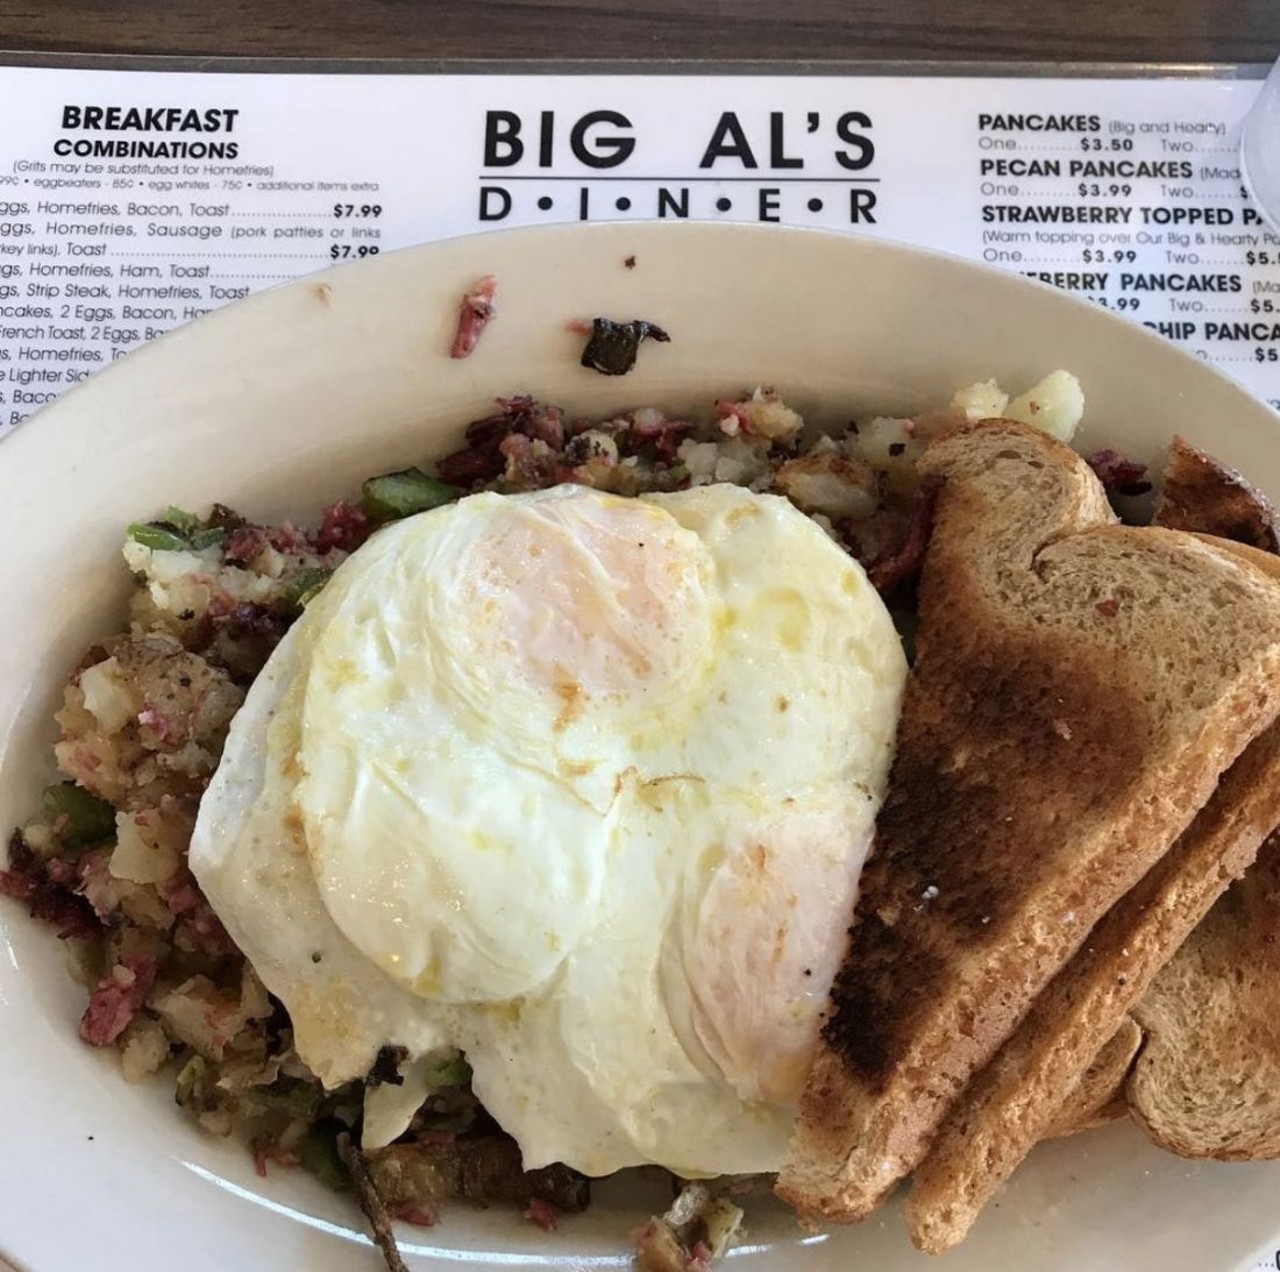  Big Al&#146;s Diner
12600 Larchmere Blvd., Cleveland 
If you miss Mom's cooking, this is the place to get your fix. Big Al's has all the comforting favorites and of course you&#146;ll find a delicious corned beef sandwich here. But the corned beef hash is the star of the show - it was featured on the Food Network&#146;s Best Thing I Ever Ate by Michael Symon.
Photo via @JamesBXXL/Instagram